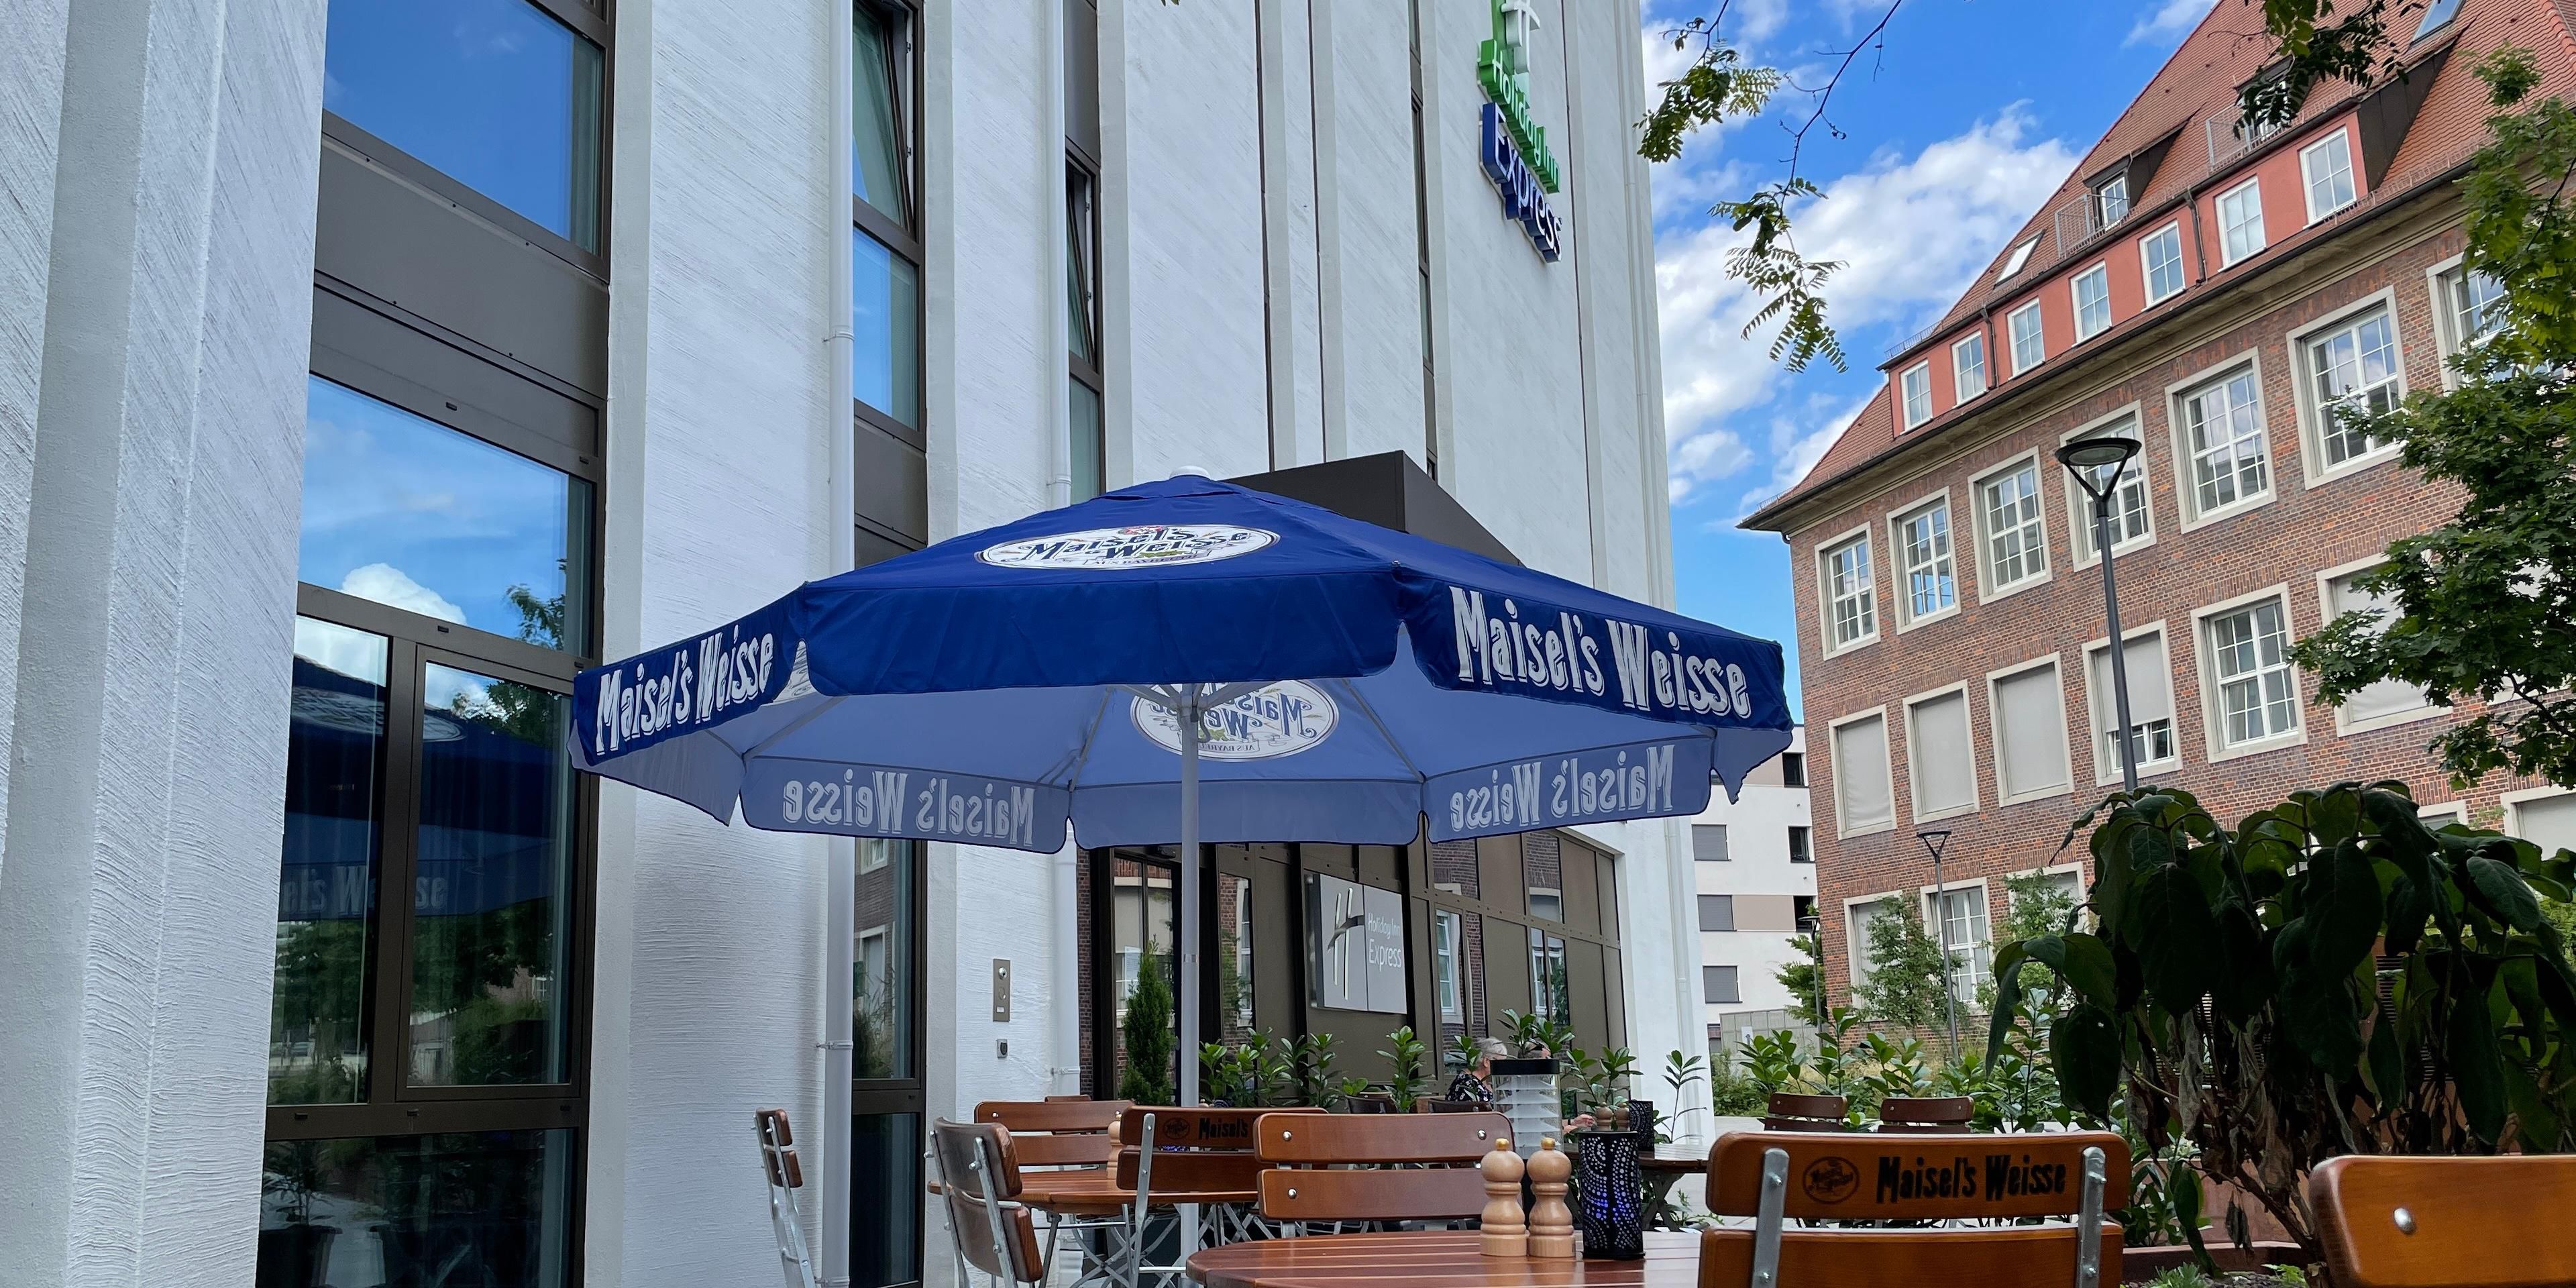 Enjoy Franconian hospitality in our Holiday Inn Express beer garden (open according to season), located directly at the hotel. A freshly tapped cool Franconian beer or a delicious meal. For breakfast, lunch or dinner - our beer garden offers quiet and relaxing ambience during your stay.